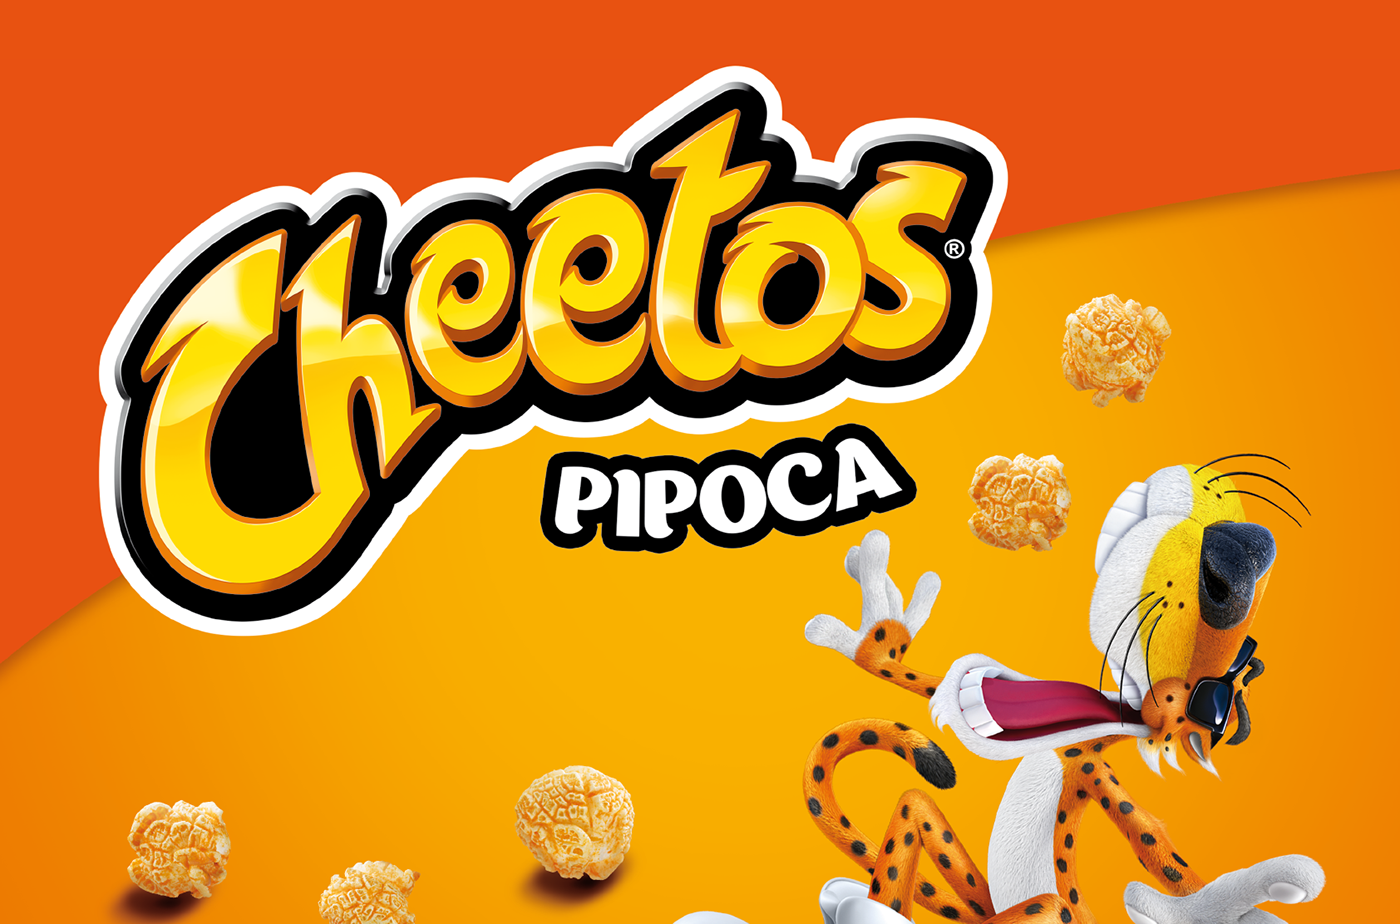 40. Cheetos Pipoca - PepsiCo - PACKAGE. 